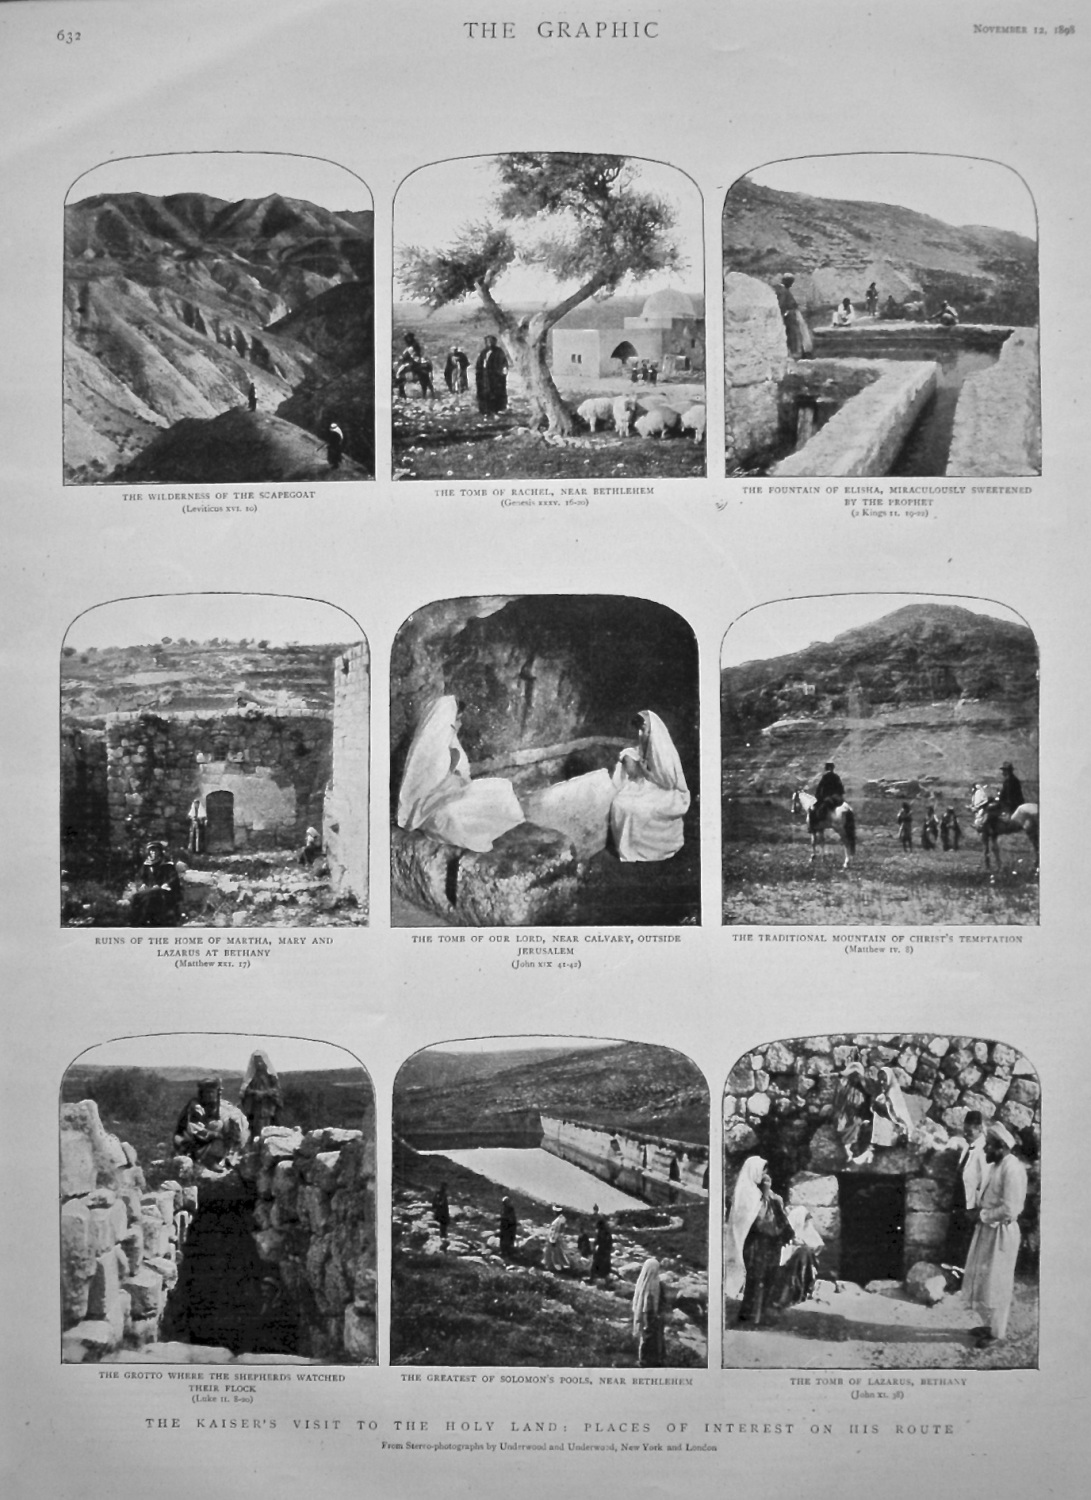 The Kaiser's Visit to the Holy Land : Places of Interest on His Route. 1898